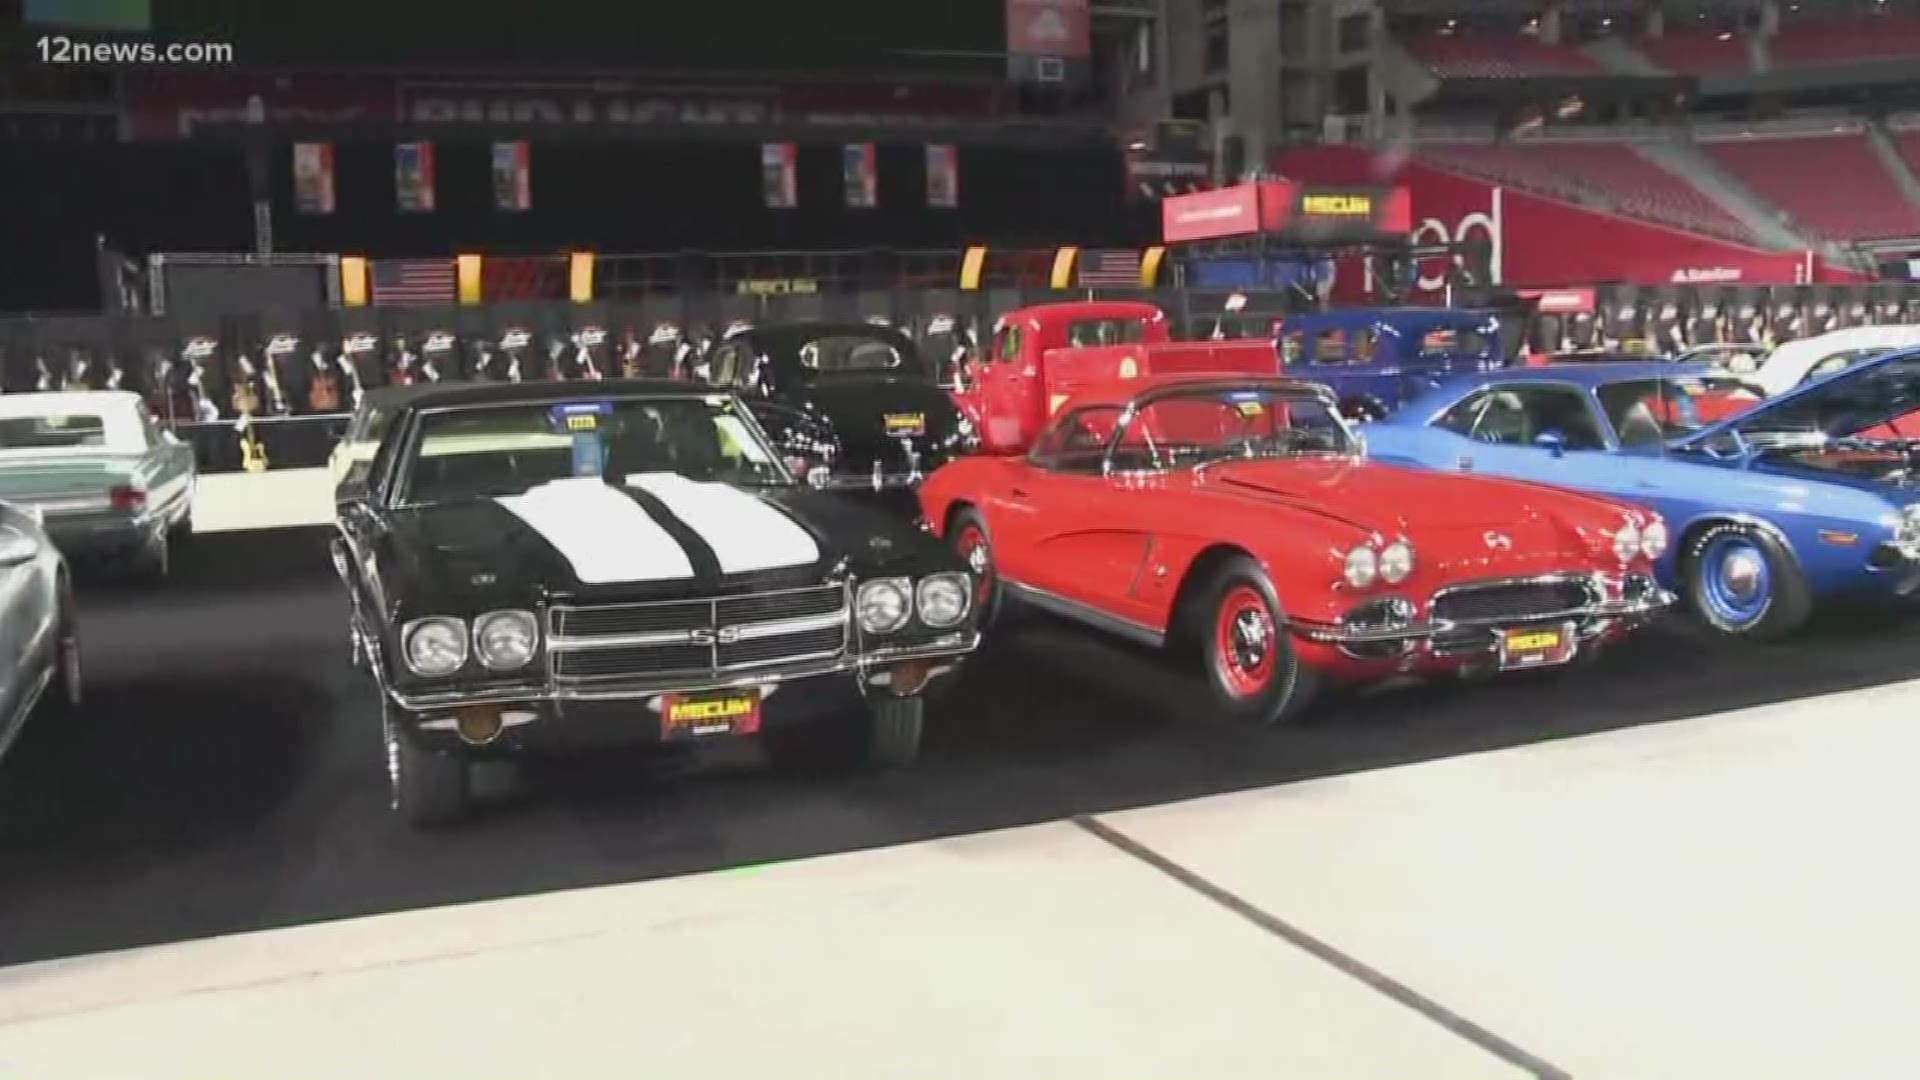 About 1,500 muscle cars, classics, Corvettes and hot rods are hitting the auction block for Mecum Glendale 2020. Team 12’s Trisha Hendricks is giving us a sneak peek